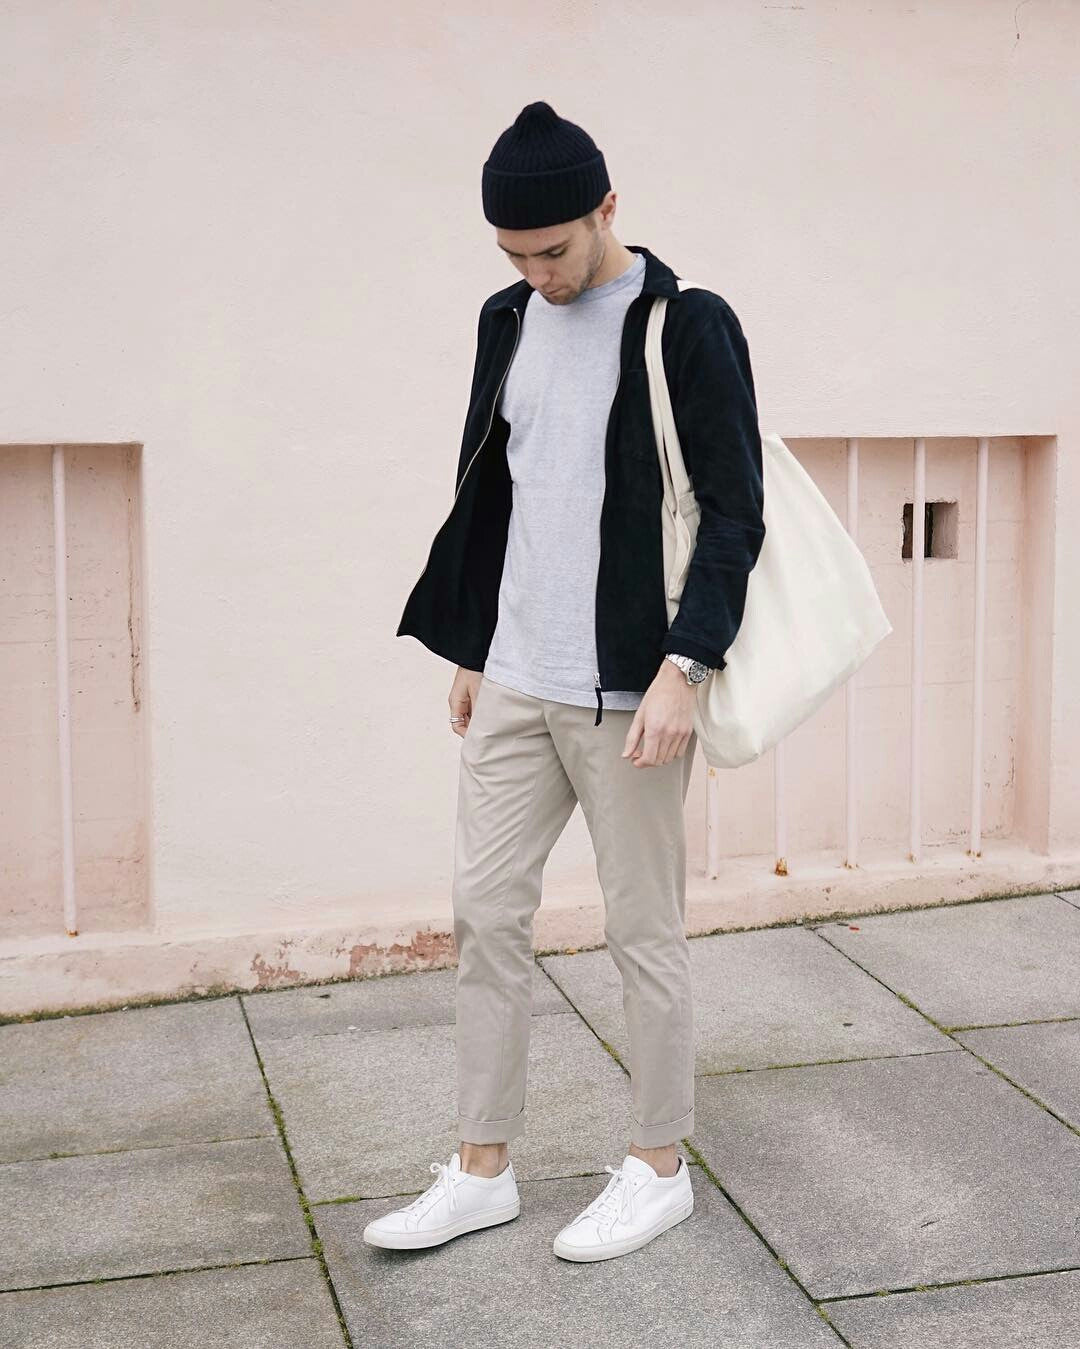 Want to dress better with basics? Check out these amazing outfit ideas you can try now. 